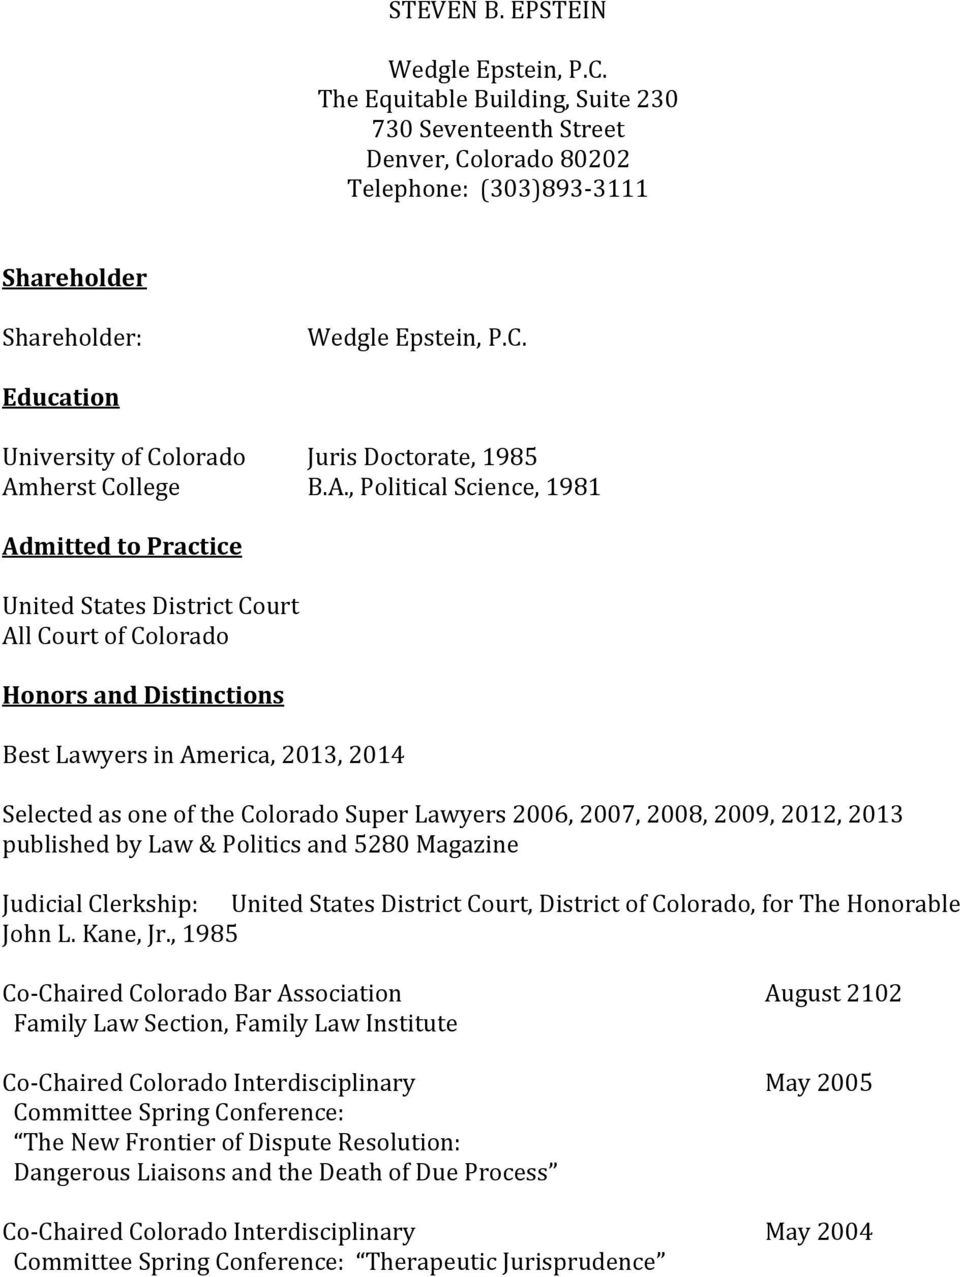 Lawyers 2006, 2007, 2008, 2009, 2012, 2013 published by Law & Politics and 5280 Magazine Judicial Clerkship: United States District Court, District of Colorado, for The Honorable John L. Kane, Jr.